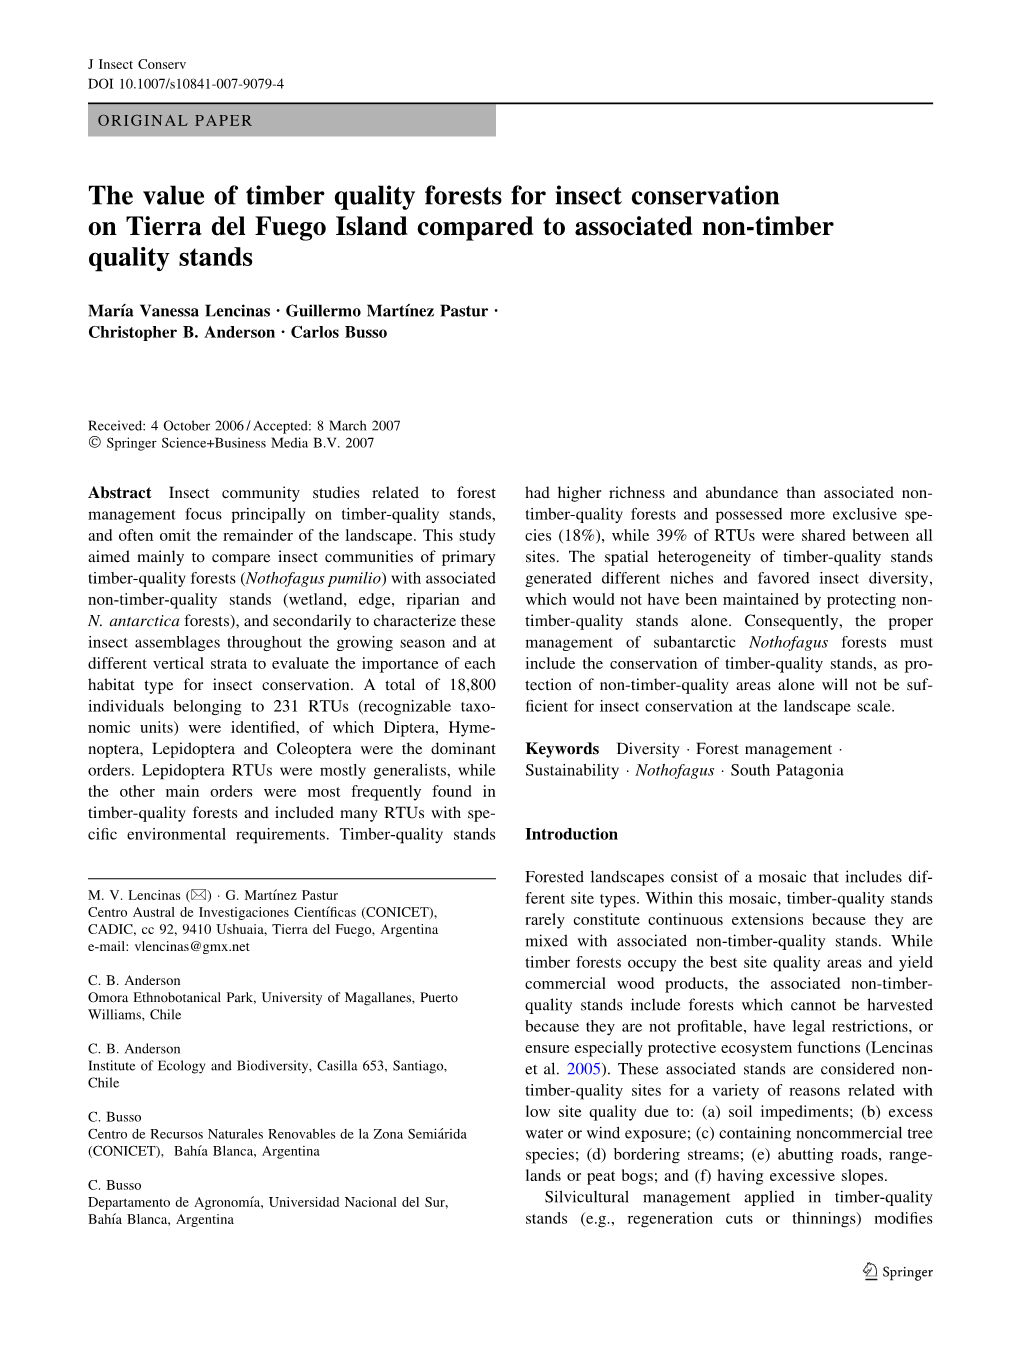 The Value of Timber Quality Forests for Insect Conservation on Tierra Del Fuego Island Compared to Associated Non-Timber Quality Stands